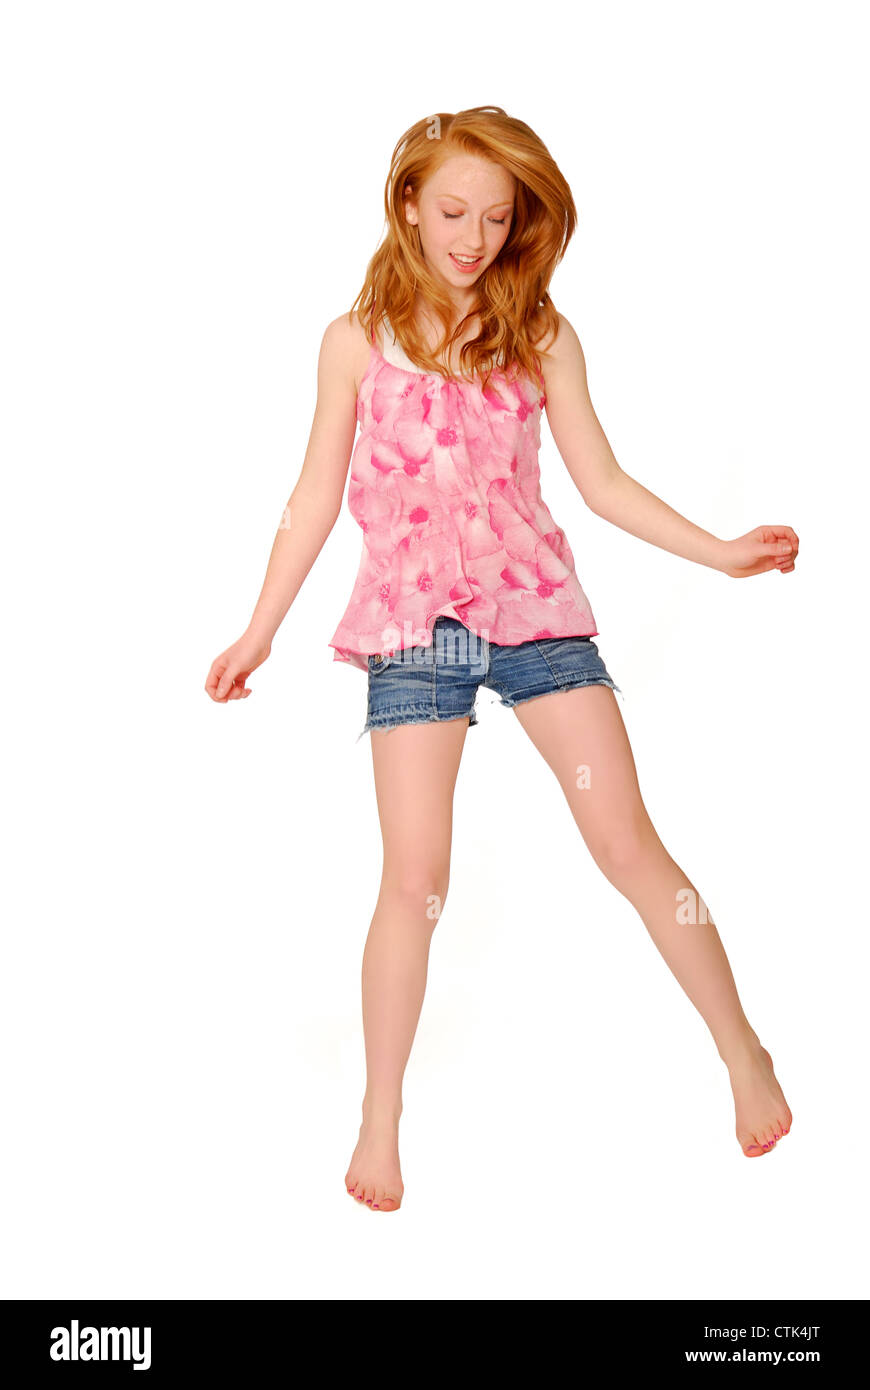 Pretty fourteen year old girl wearing pink flowered shirt and cutoff bluejean shorts, jumping or bouncing. Stock Photo